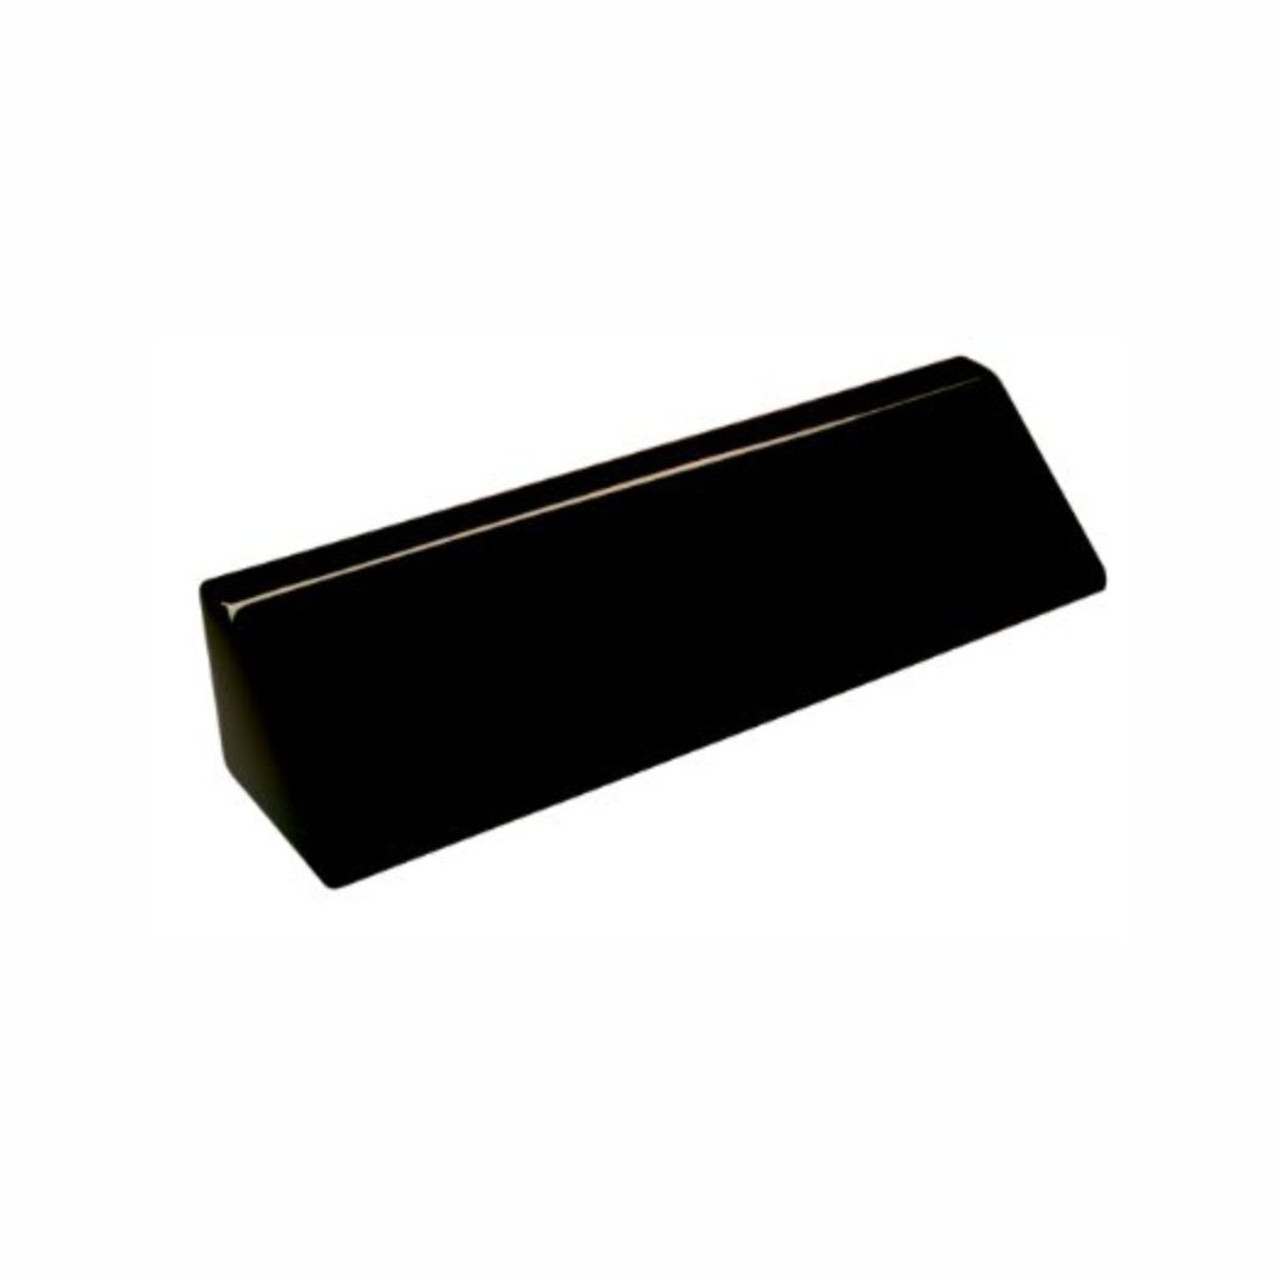 Chevrolet Buick Cadillac Name Plates with Optional Holder